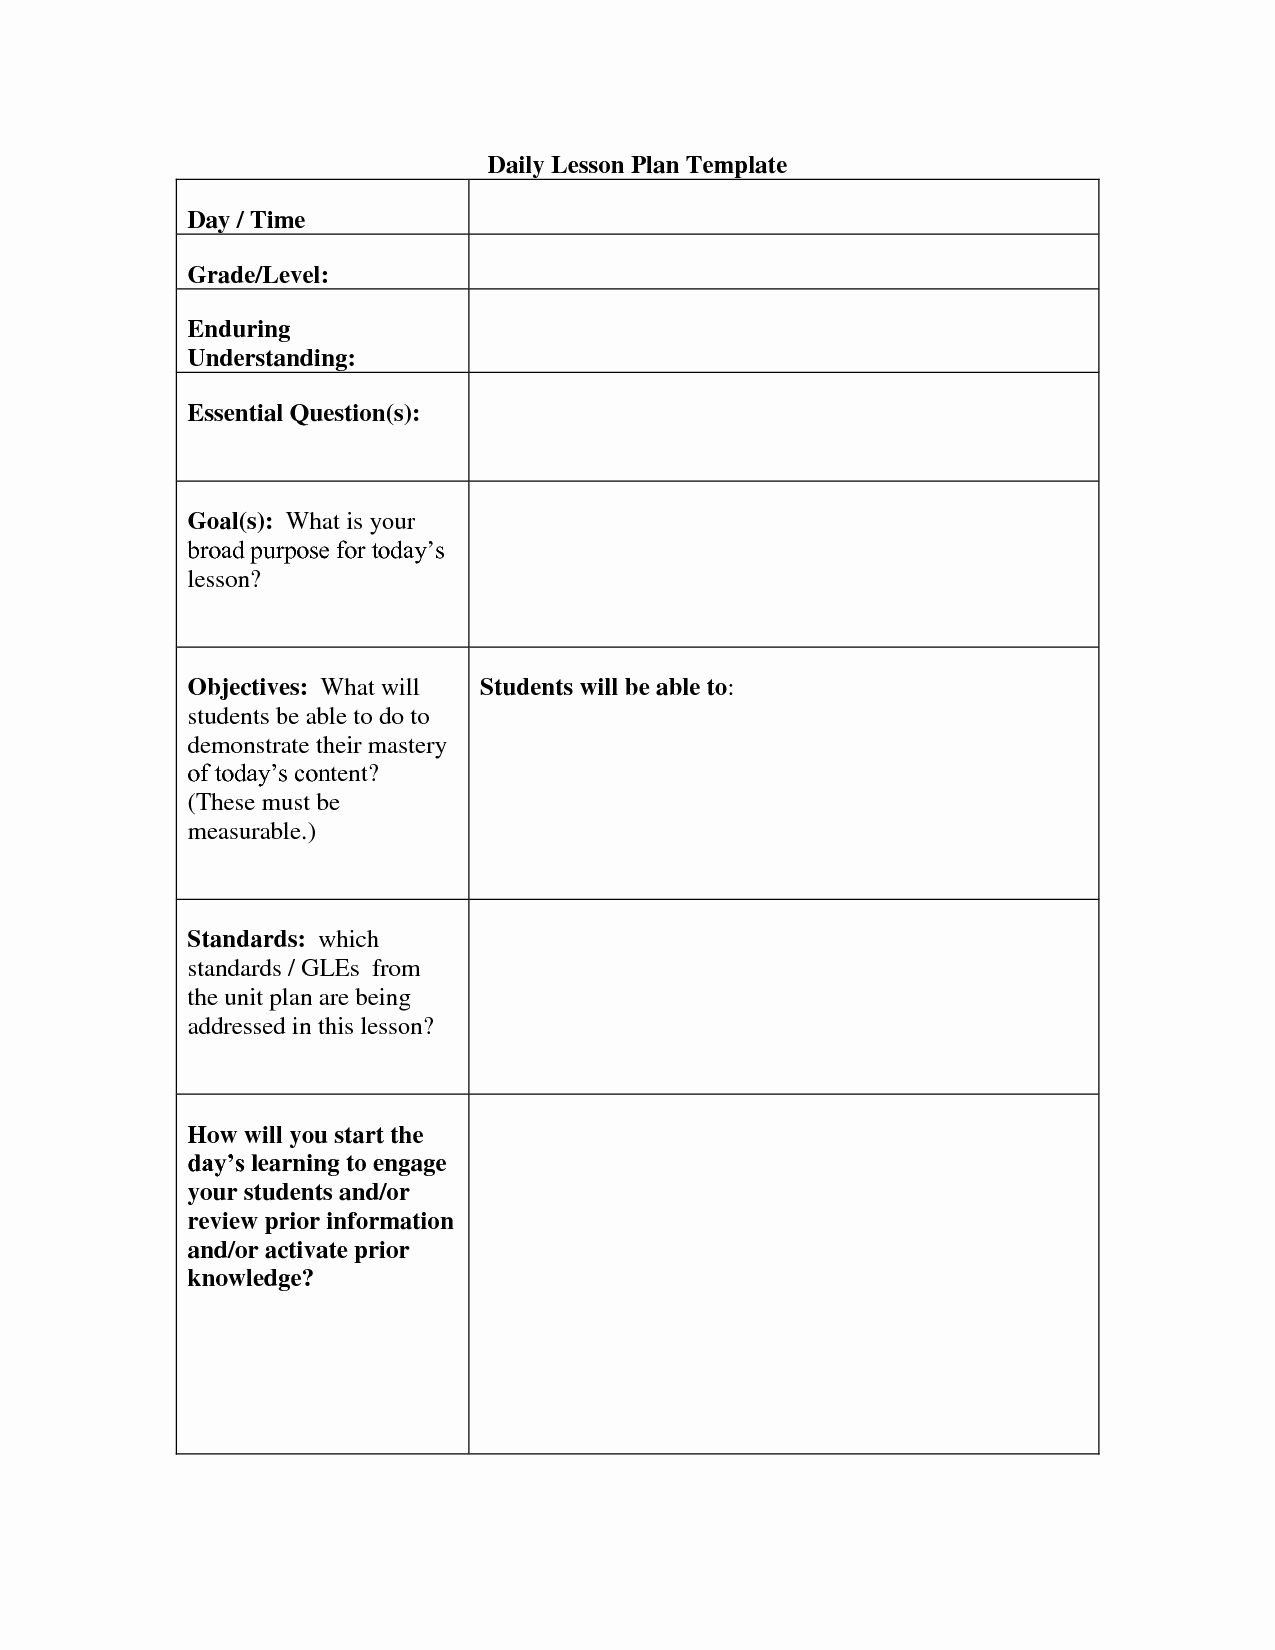 Lesson Plan Outline Template New Daily Lesson Plan Template Beepmunk